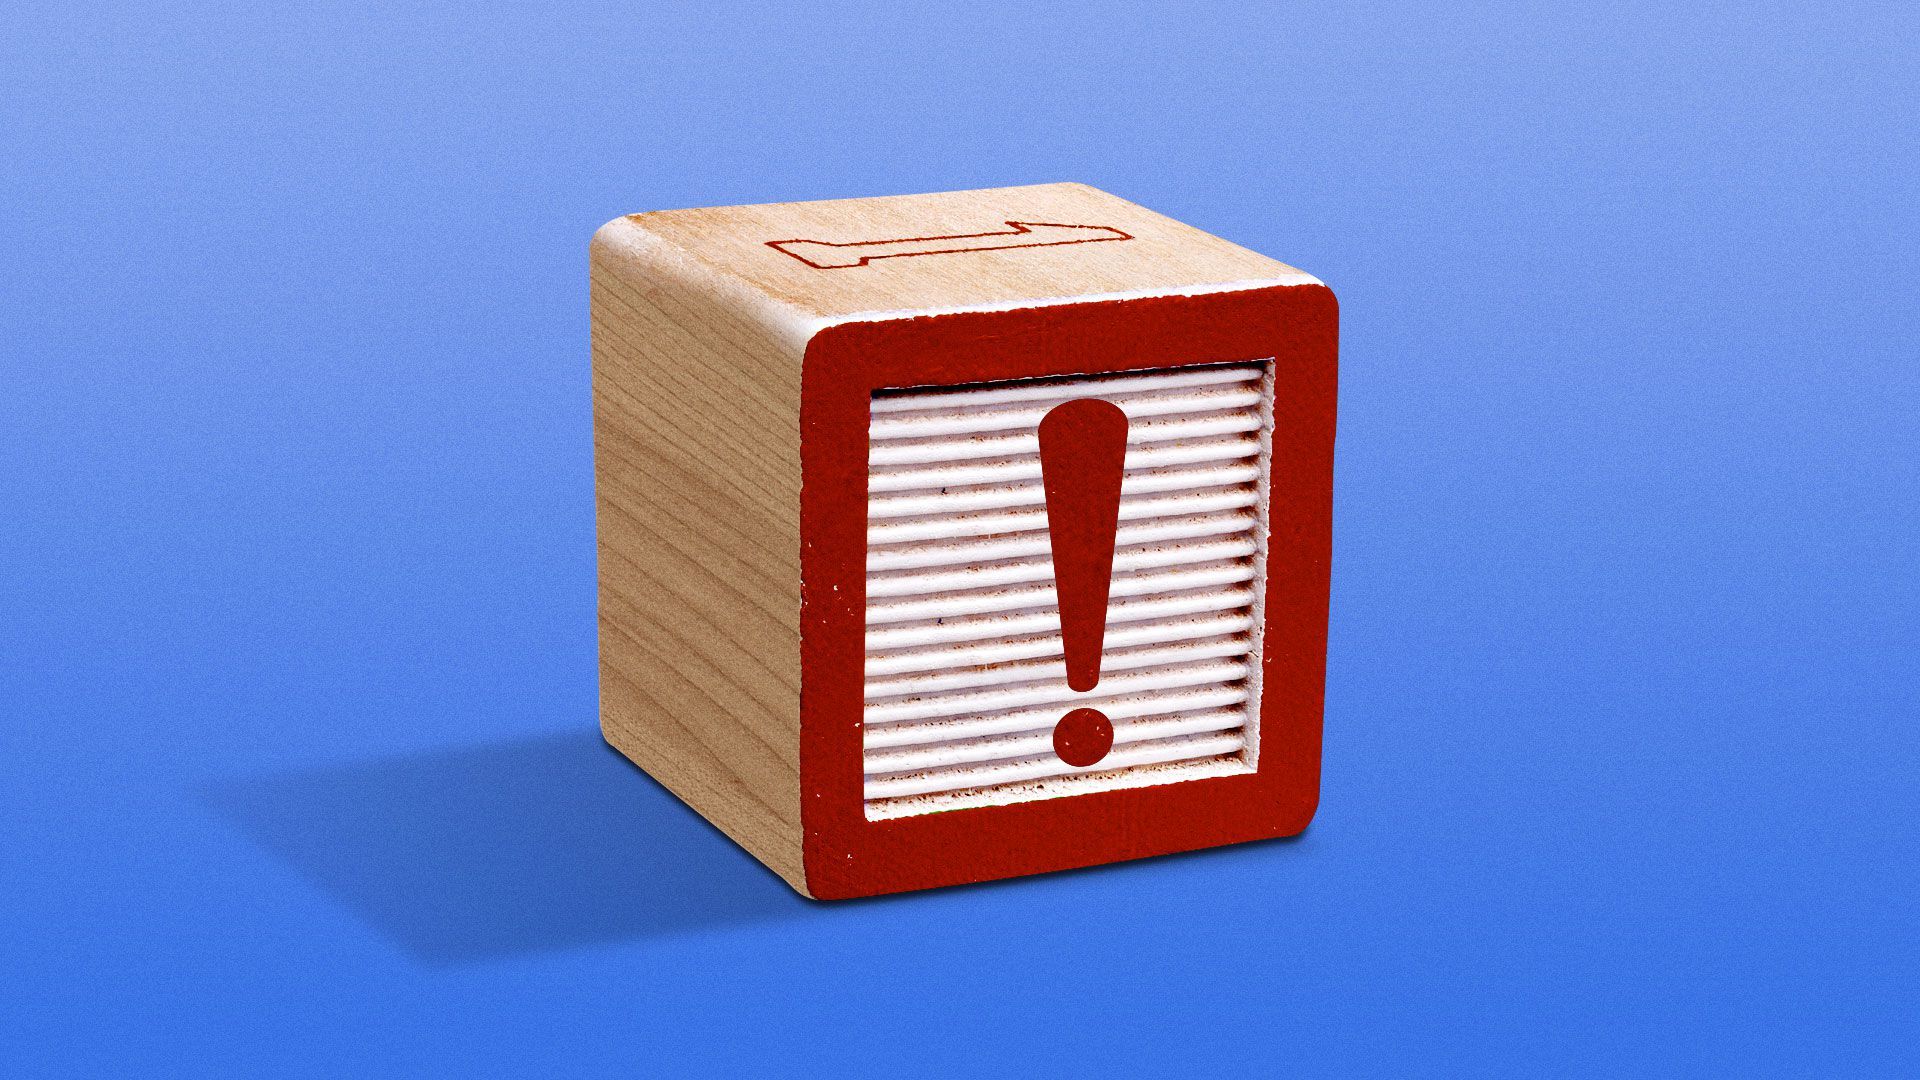 Illustration of wooden child’s play block with an exclamation point